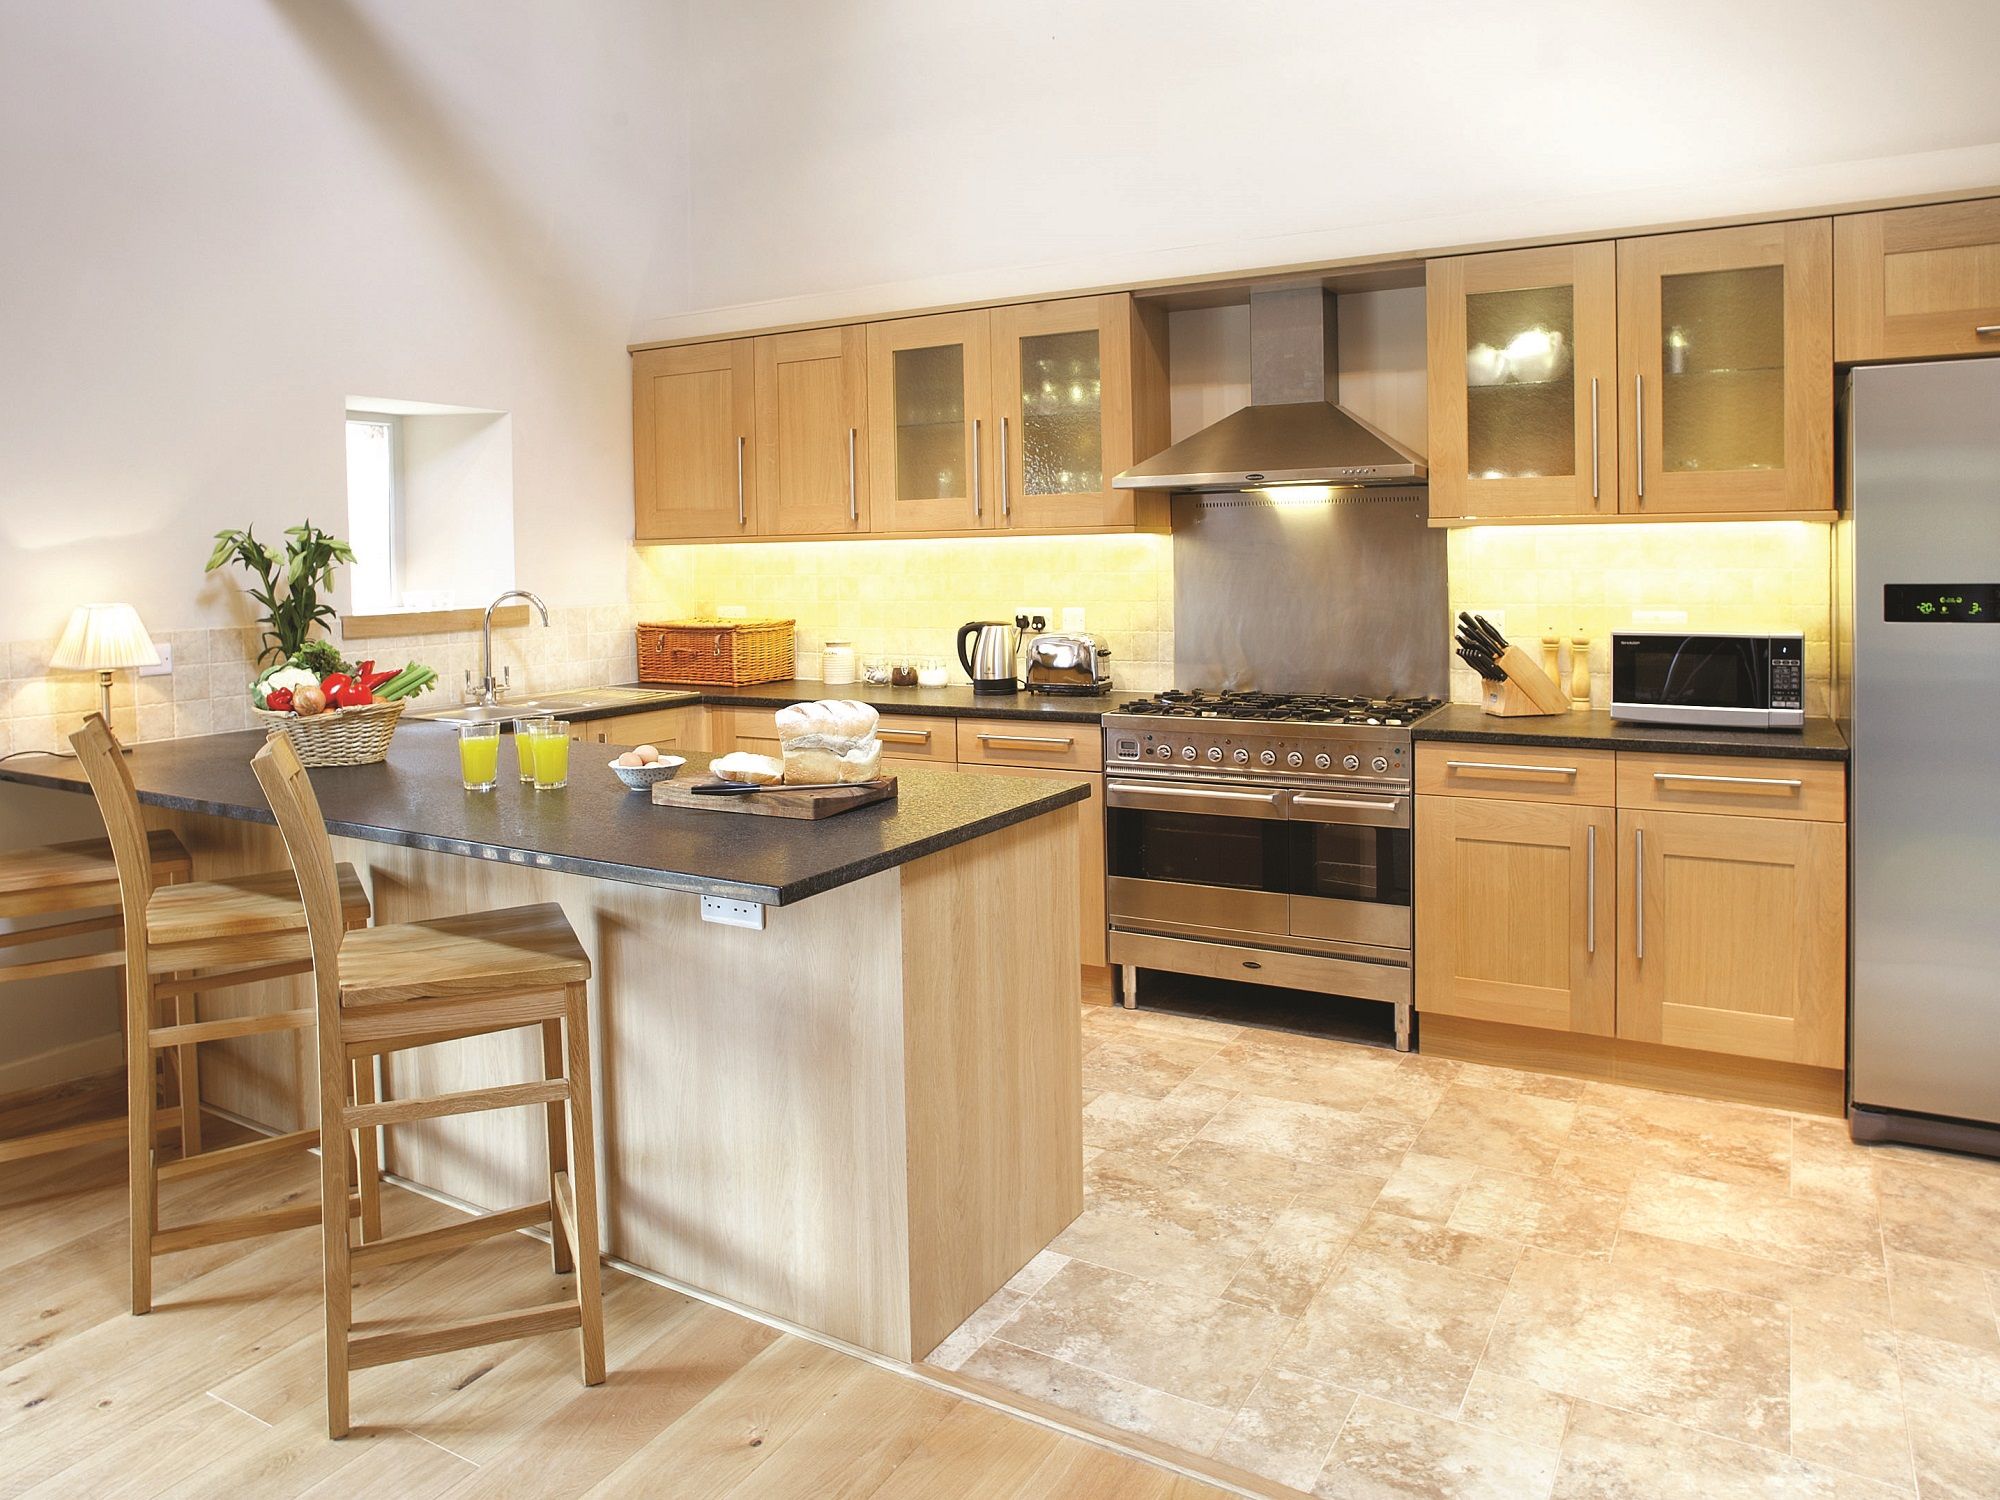 Wythburn Cottage luxury holiday cottage open plan kitchen with gas range cooker families welcome and dogs welcome holiday cottage at The Rowley Estates near Lake District